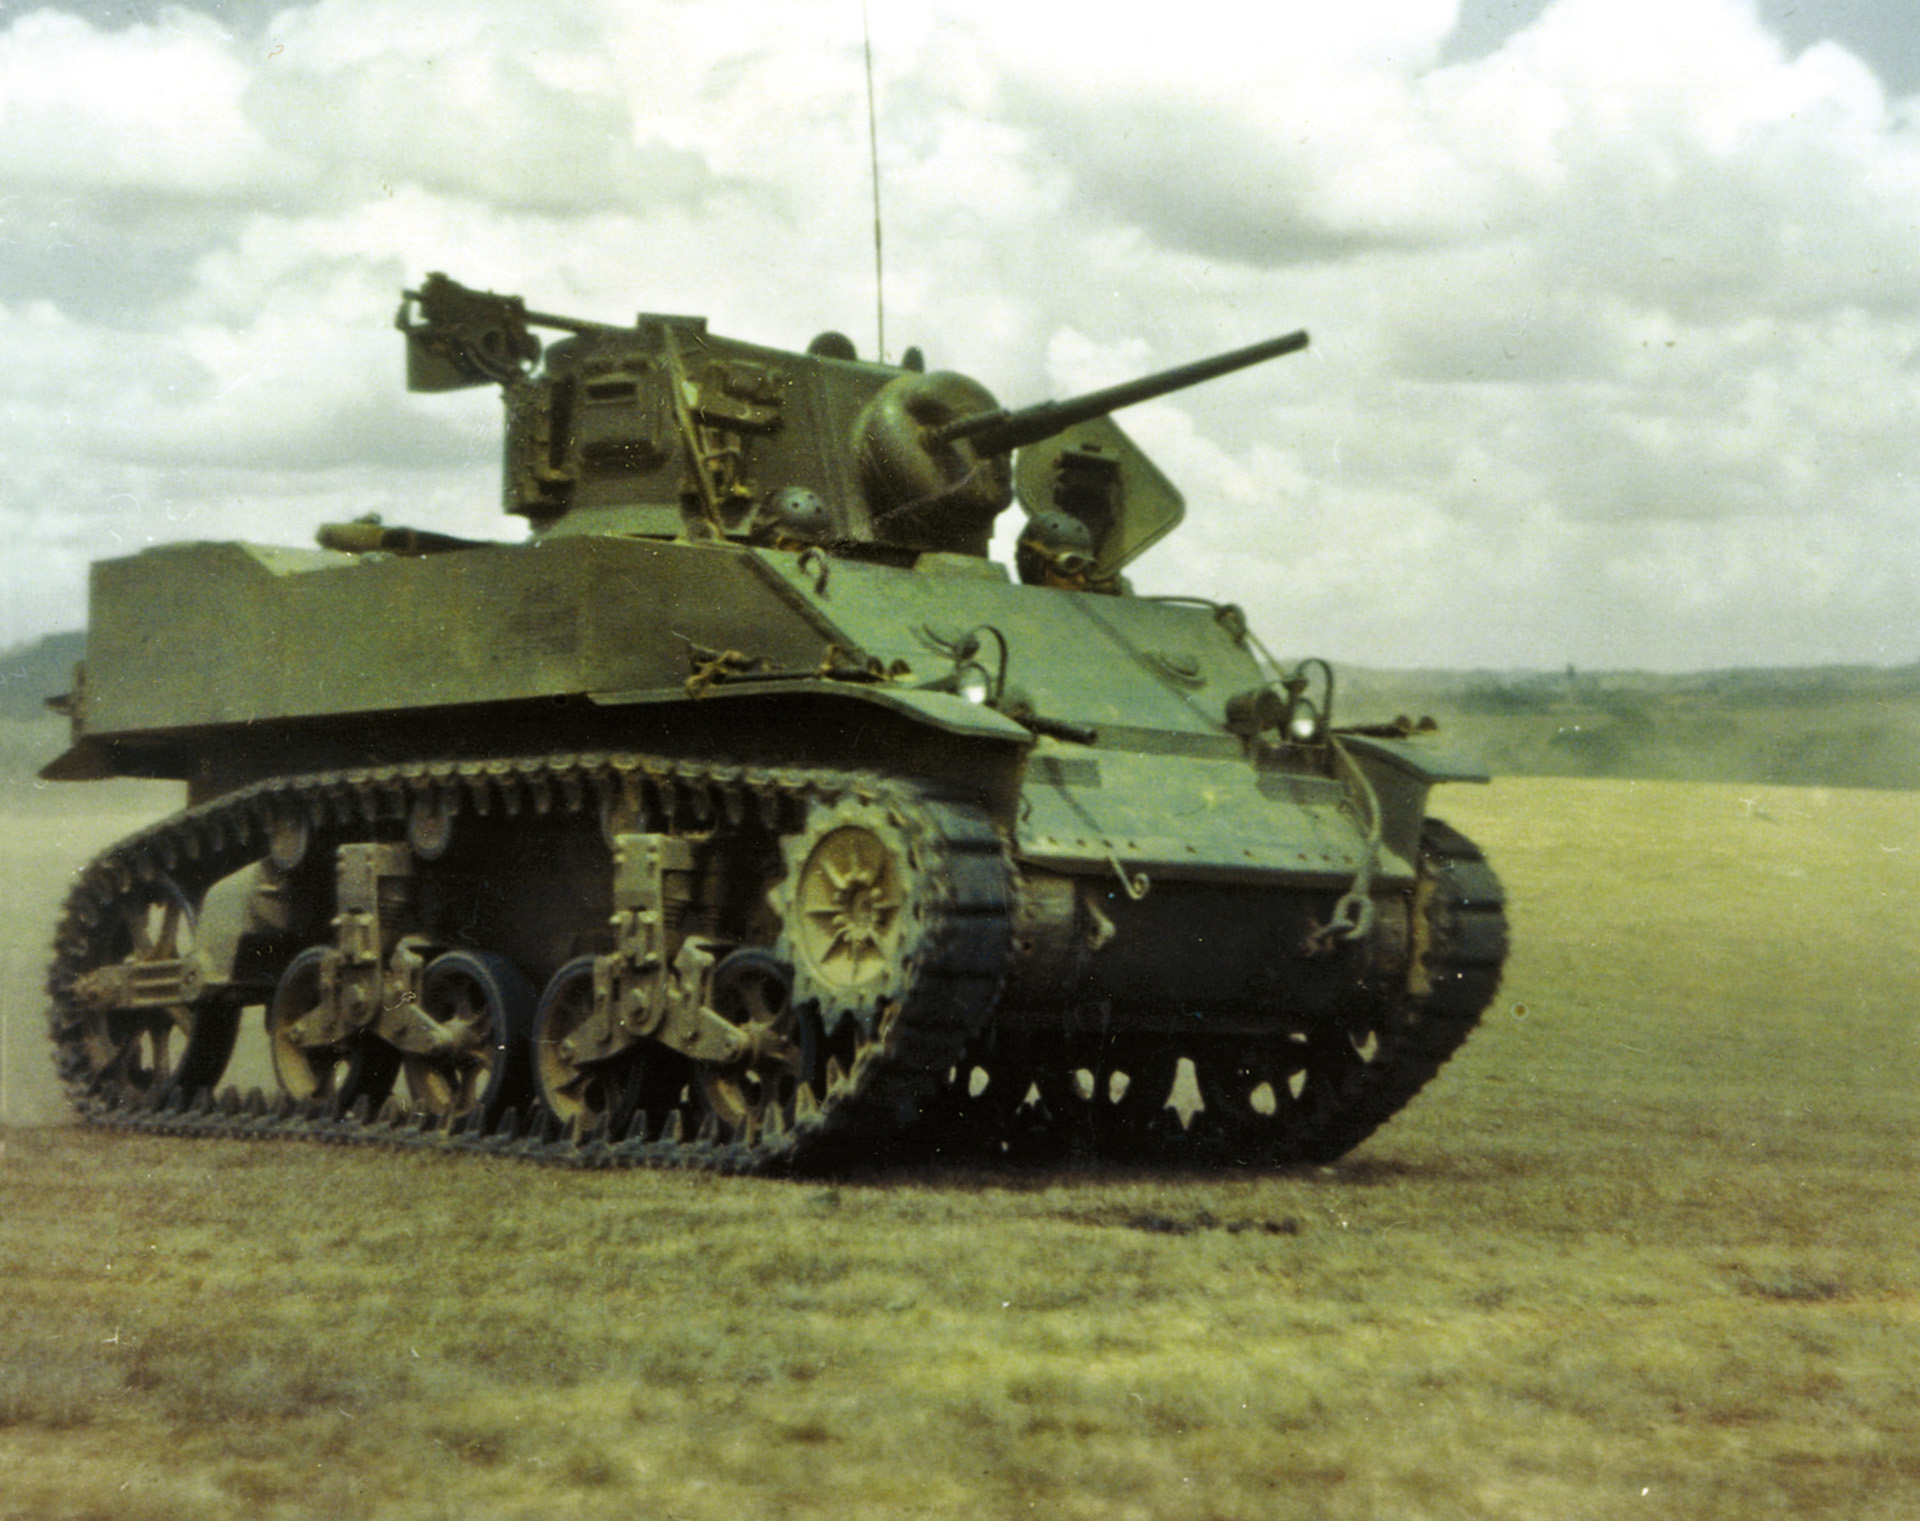 A Stuart participates in a demonstration at Camp Chorrera in the Republic of Panama. Stuarts were produced in large numbers during WWII but were limited in their ability to engage enemy armor. 